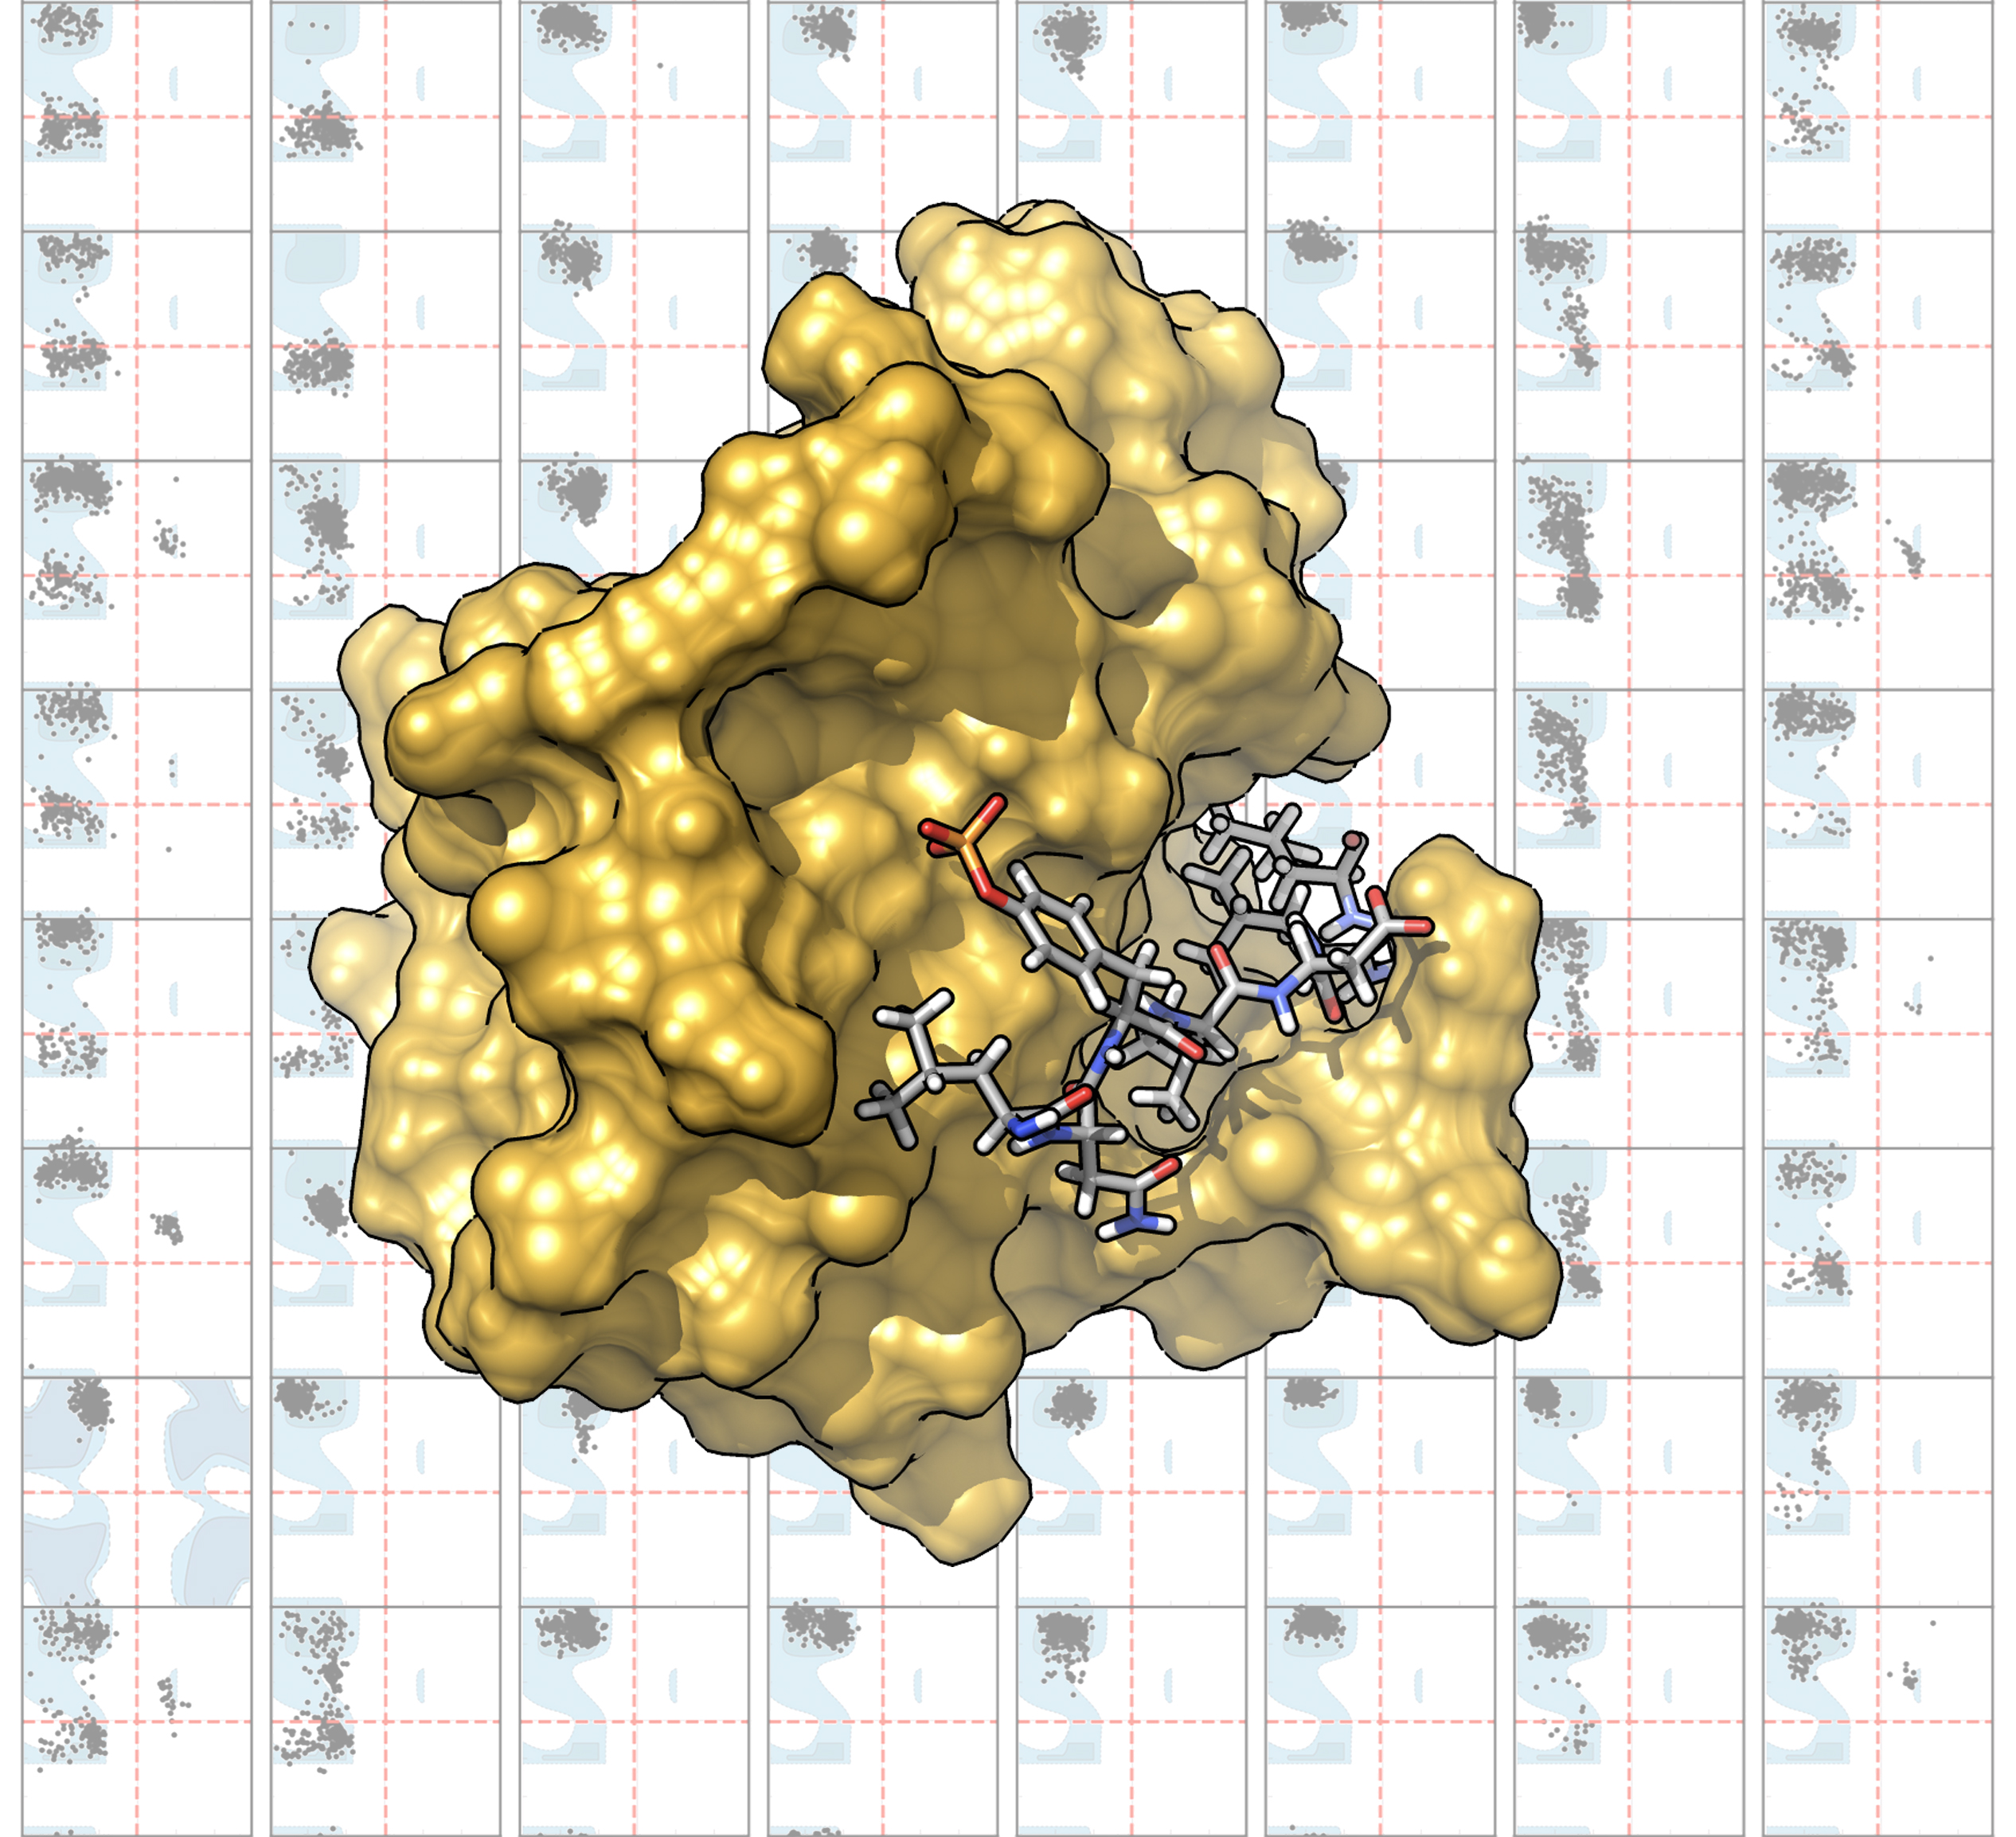 Structure of a complex between an octapeptide comprising a phosphotyrosine and the SH2 domain of the SHP2 protein from Molecular Dynamics simulations. On the background the Ramachandran Plots for different peptide sequences sampled during independent simulations.